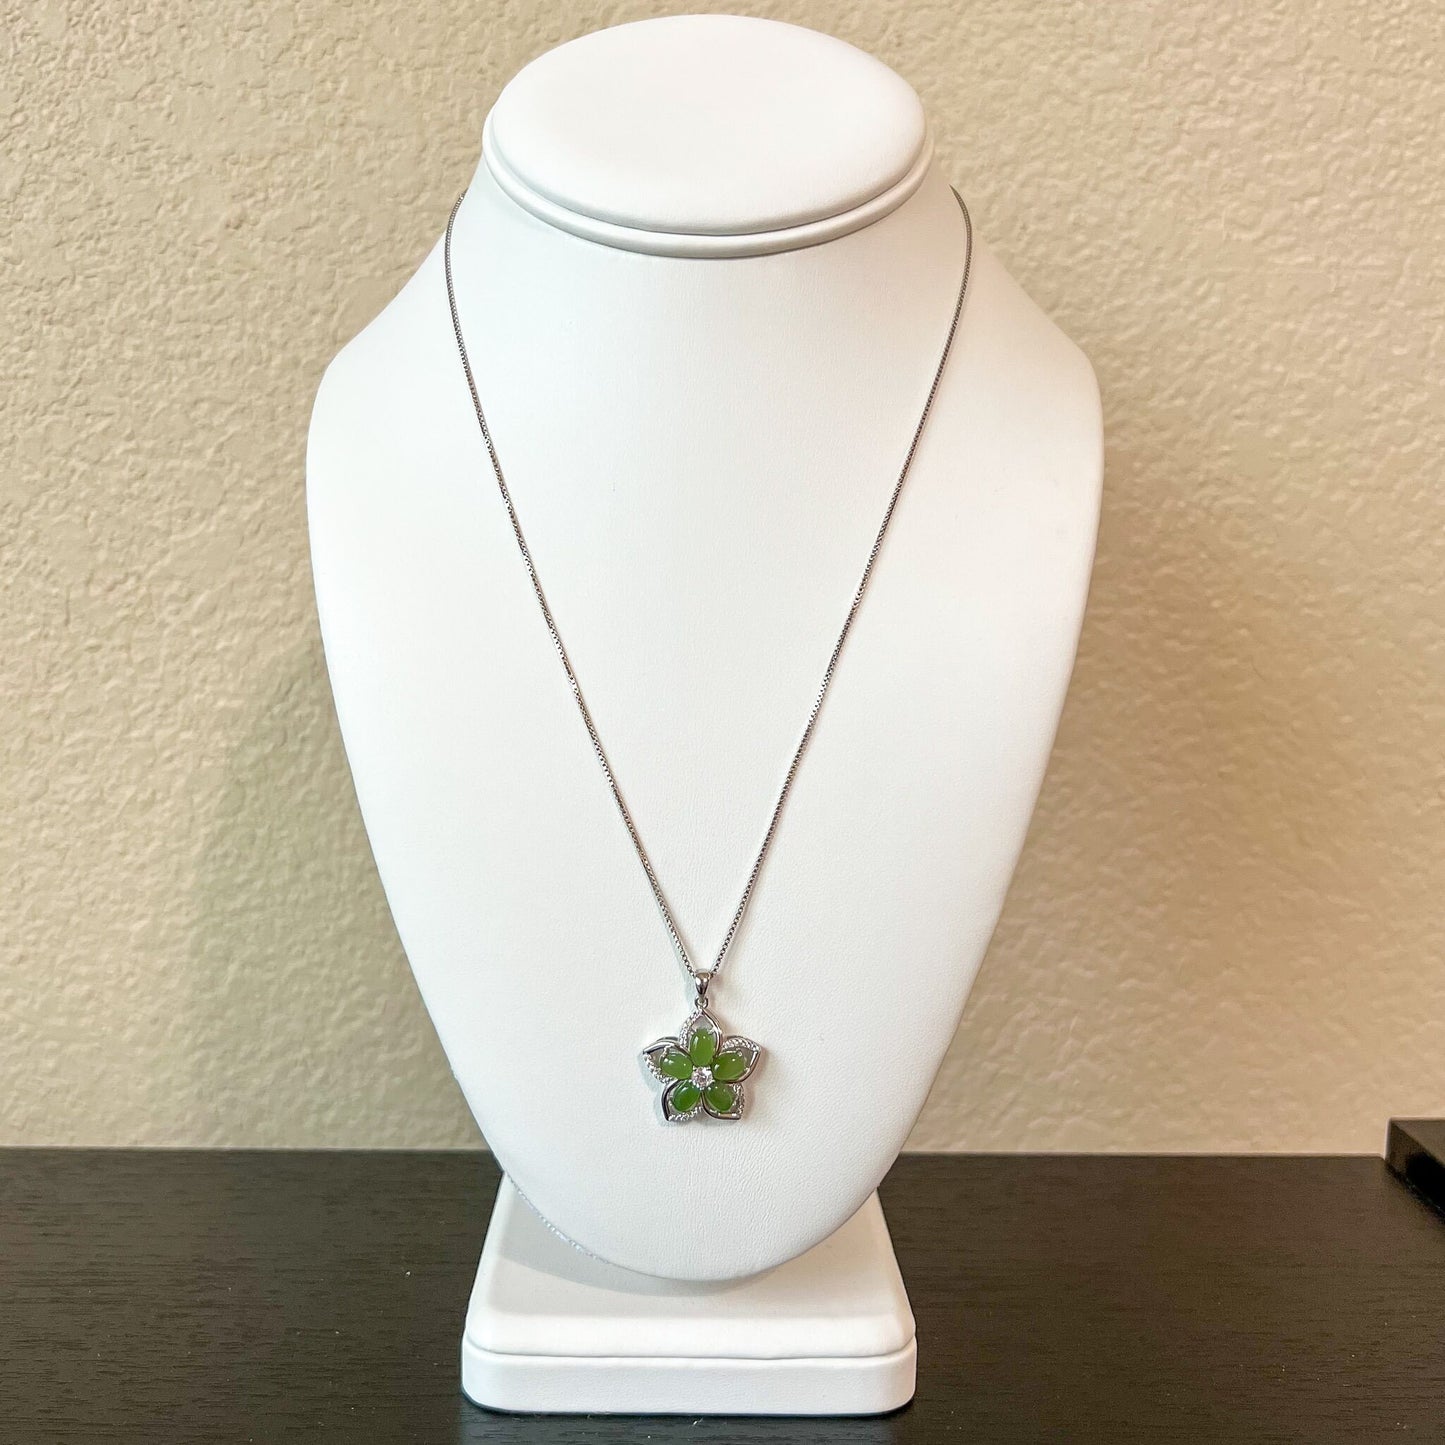 Green Flower, Nephrite Jade Sterling Silver Pendant Necklace, XWZ-1122-1679014130